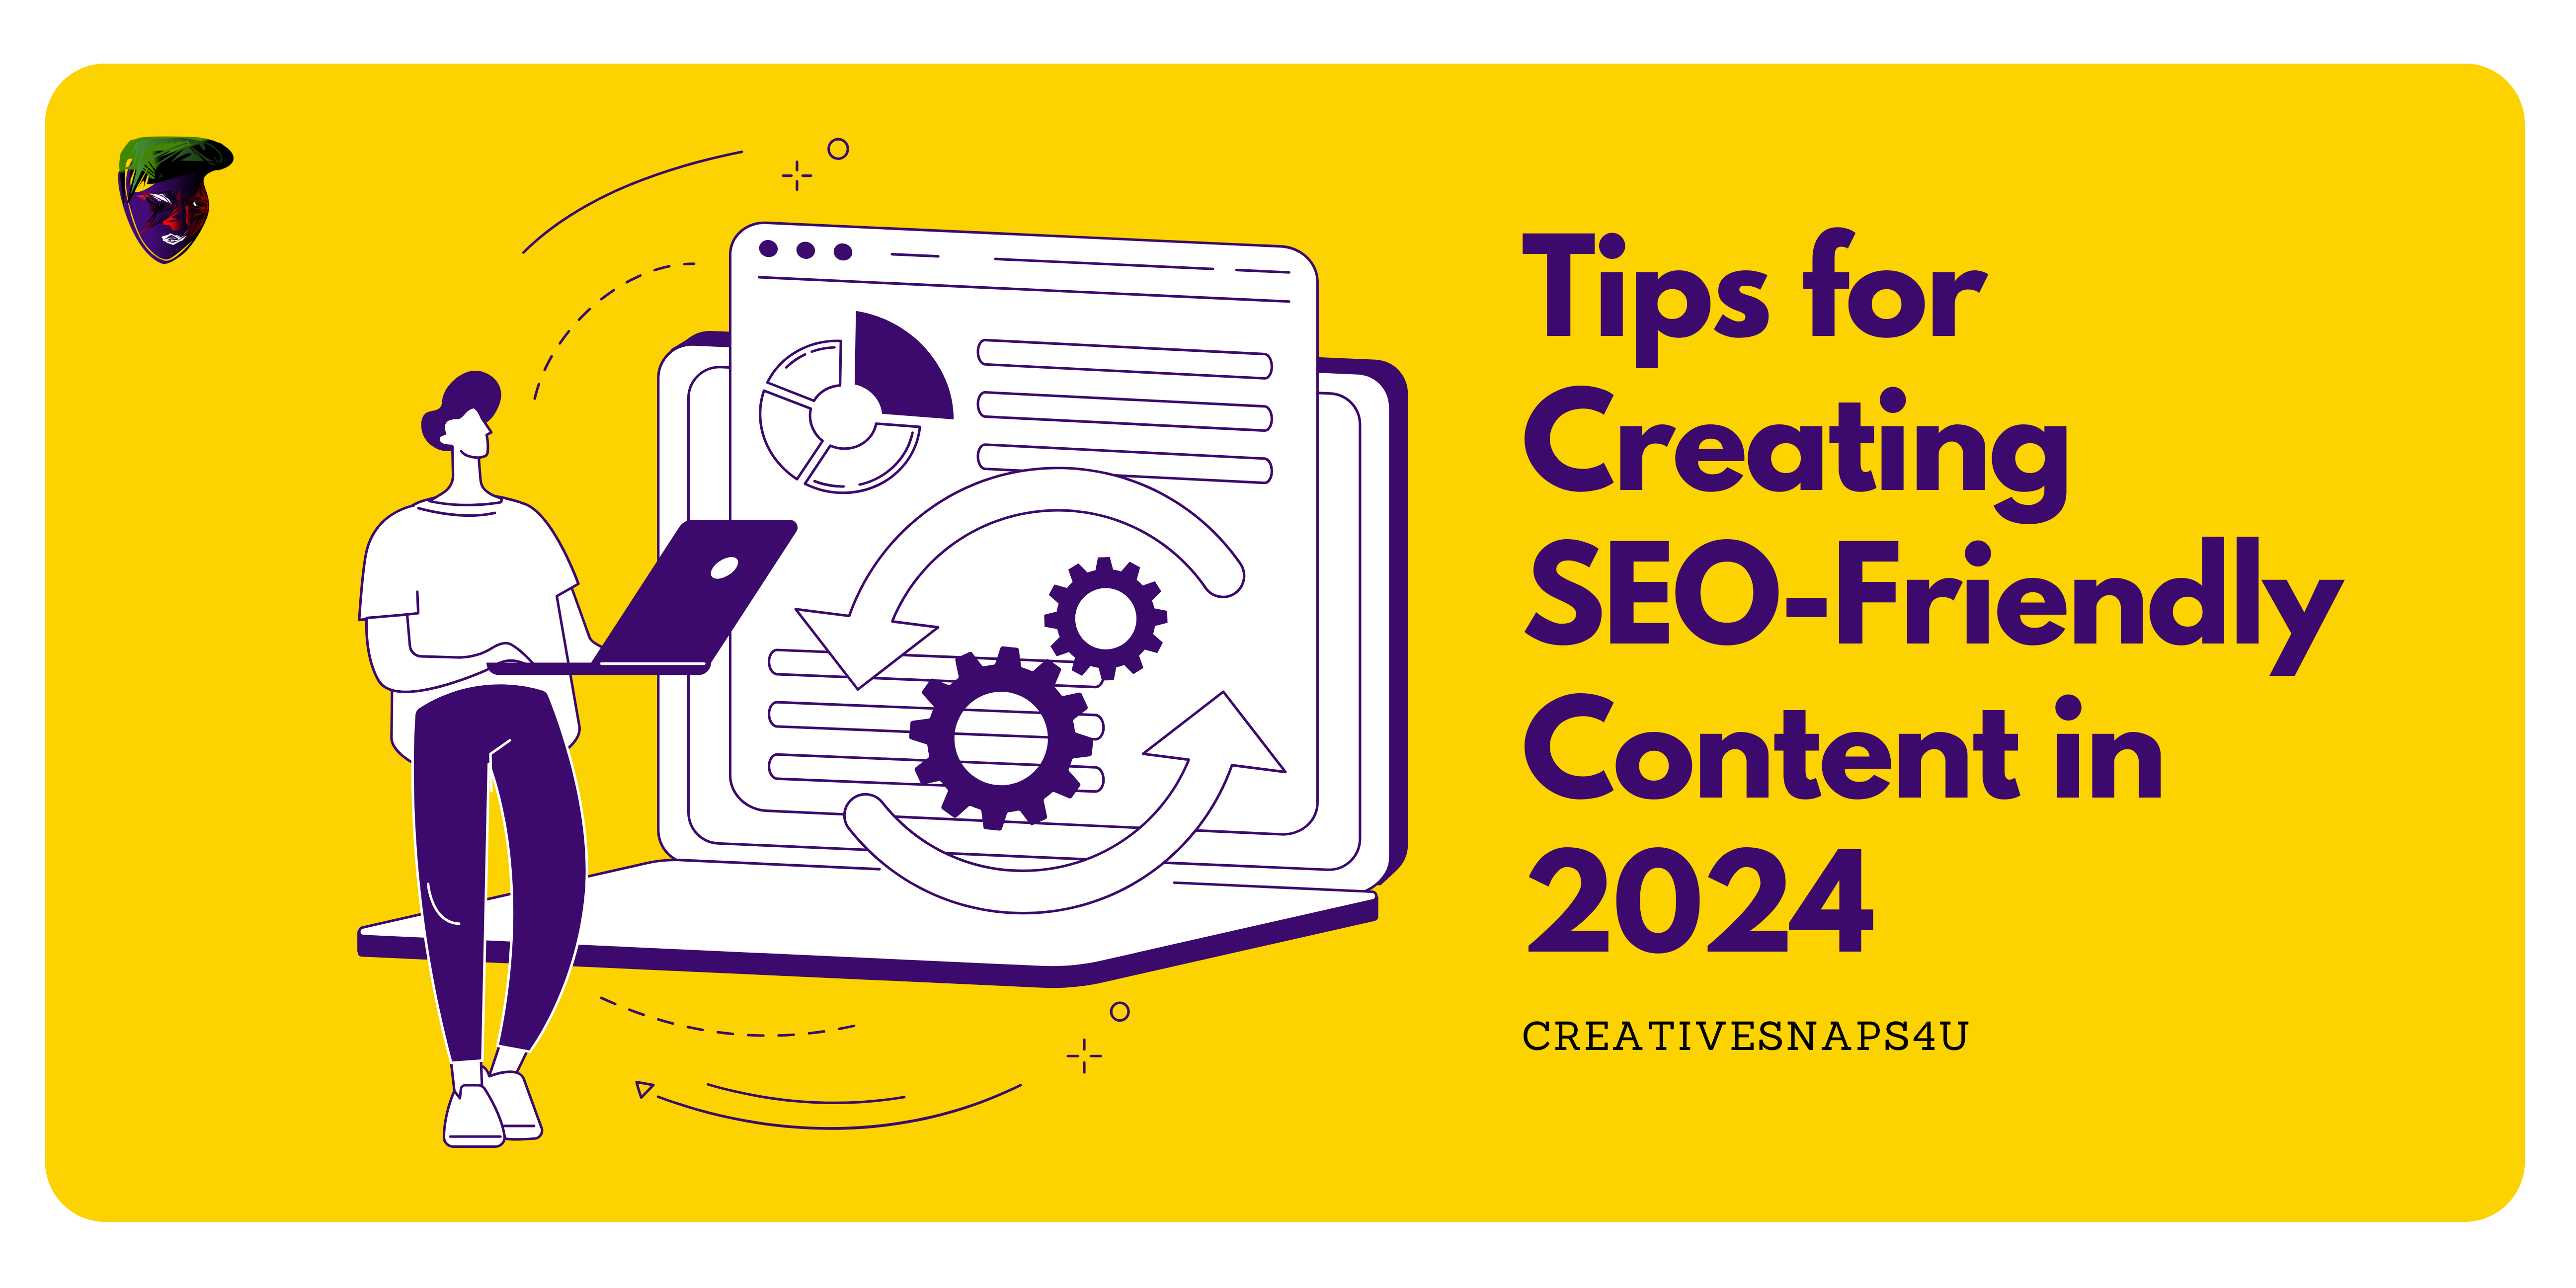 Creating SEO-Friendly Content